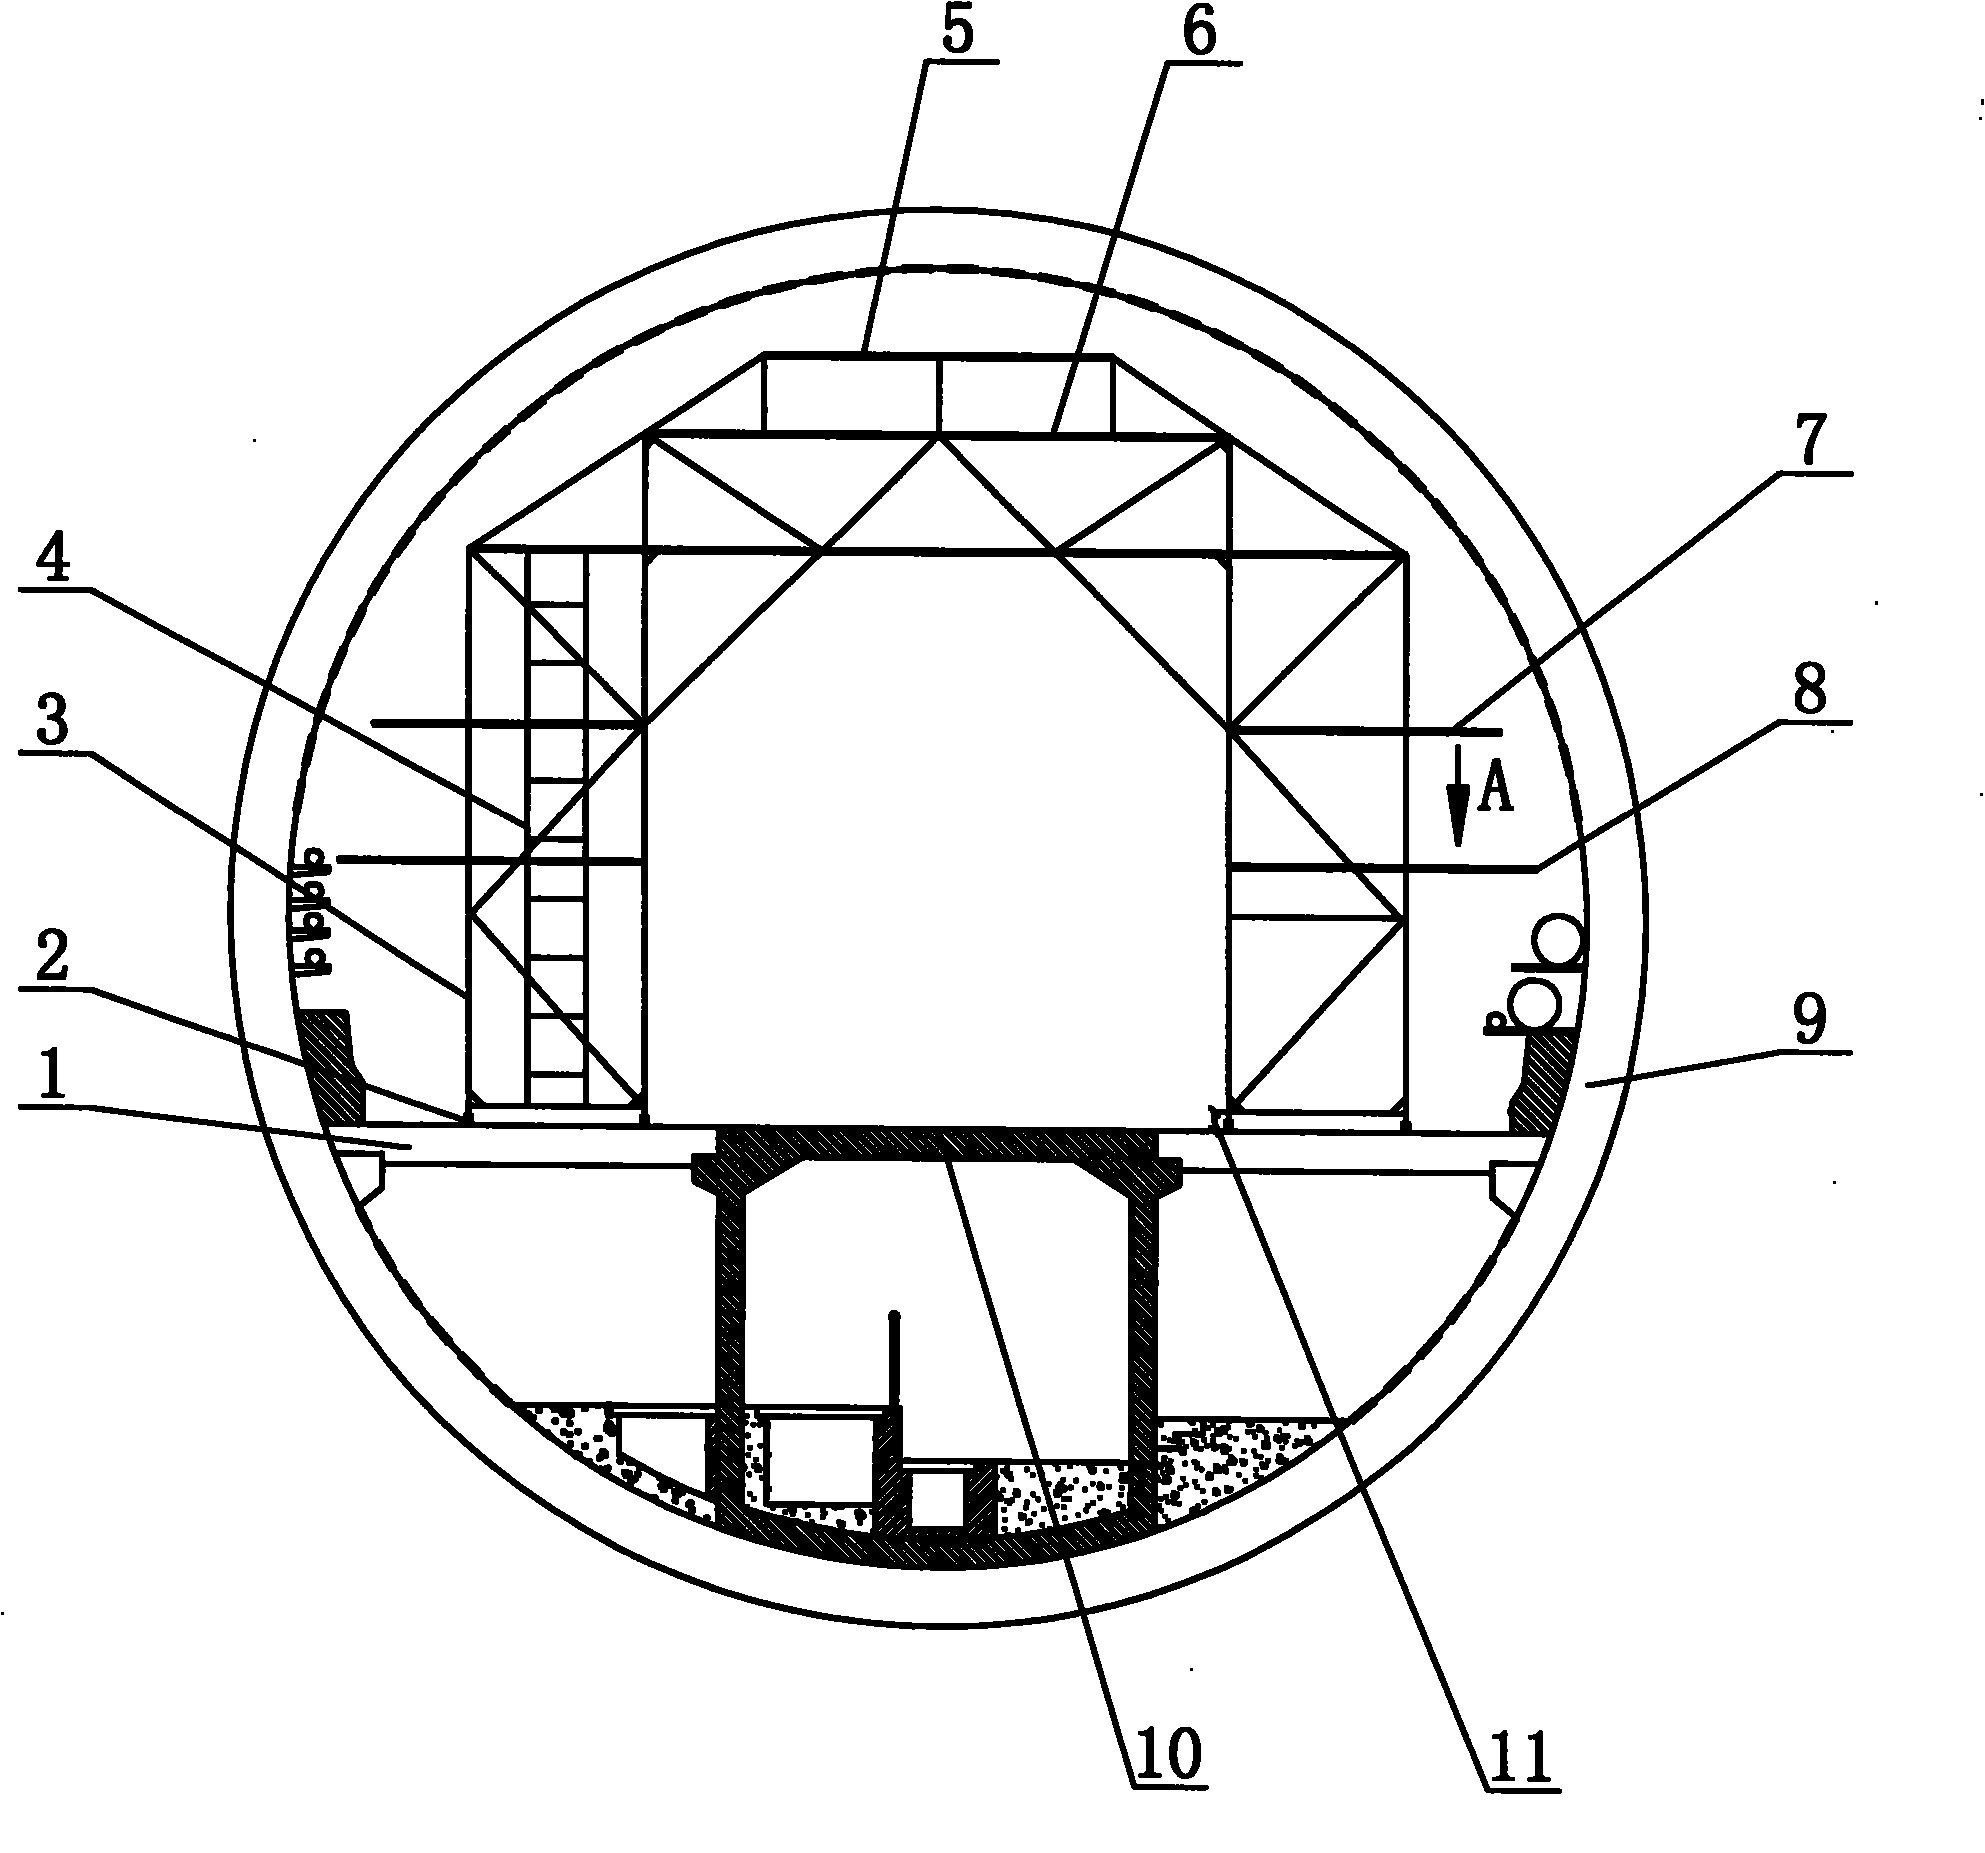 Segment caulking and hand hole blocking trolley for large-diameter shield tunnel